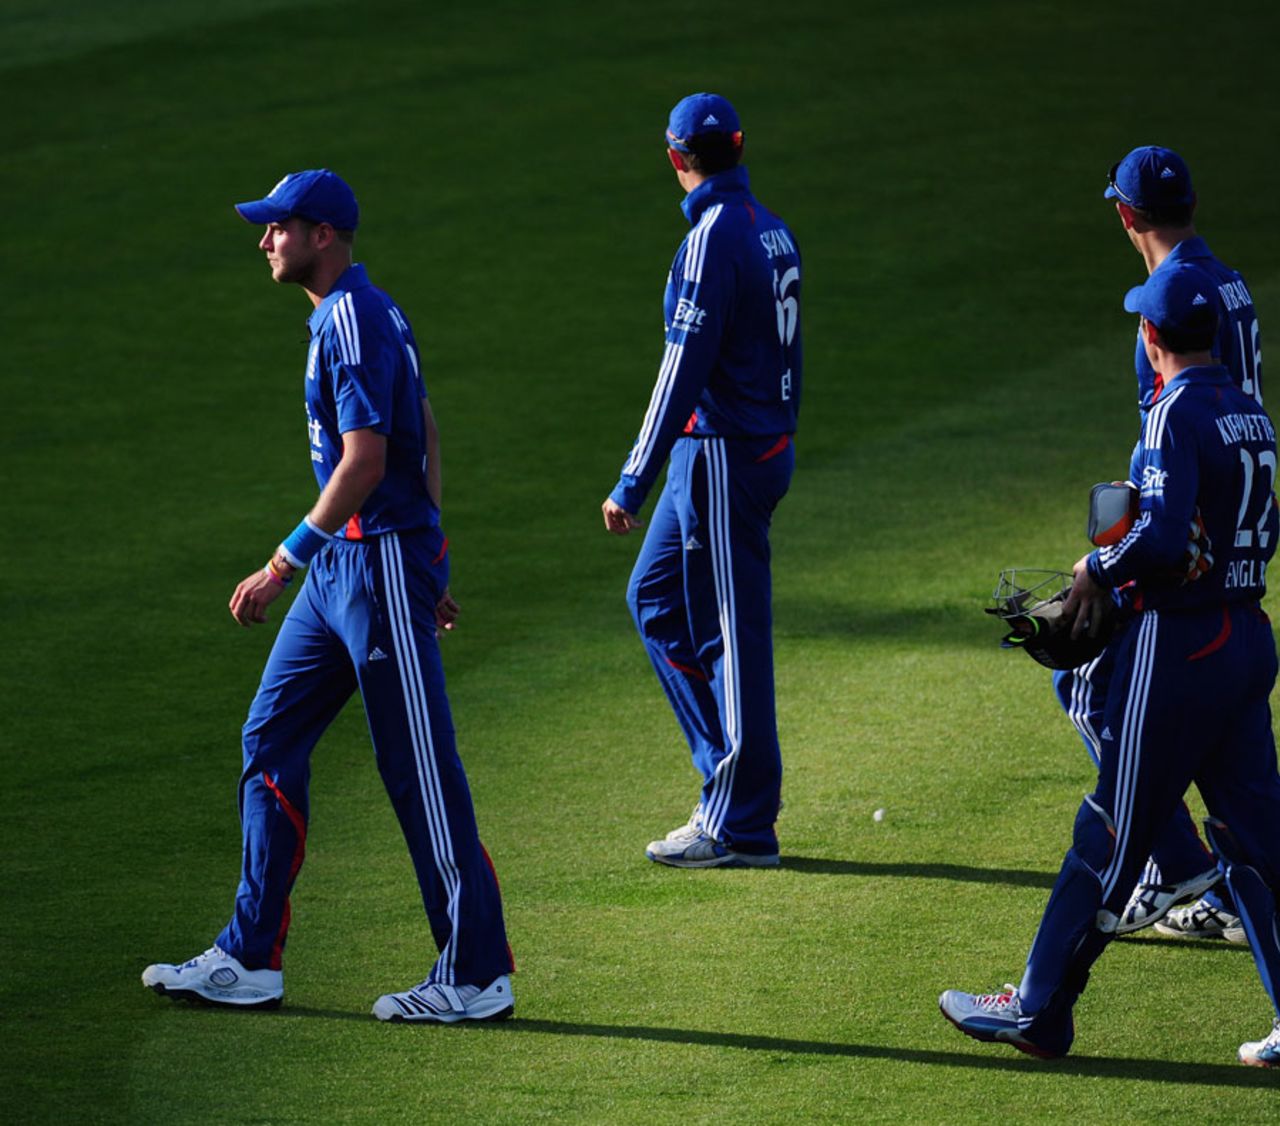 Stuart Broad leads England's players off the field, 1st NatWest T20I, Chester-le-Street, September 8, 2012